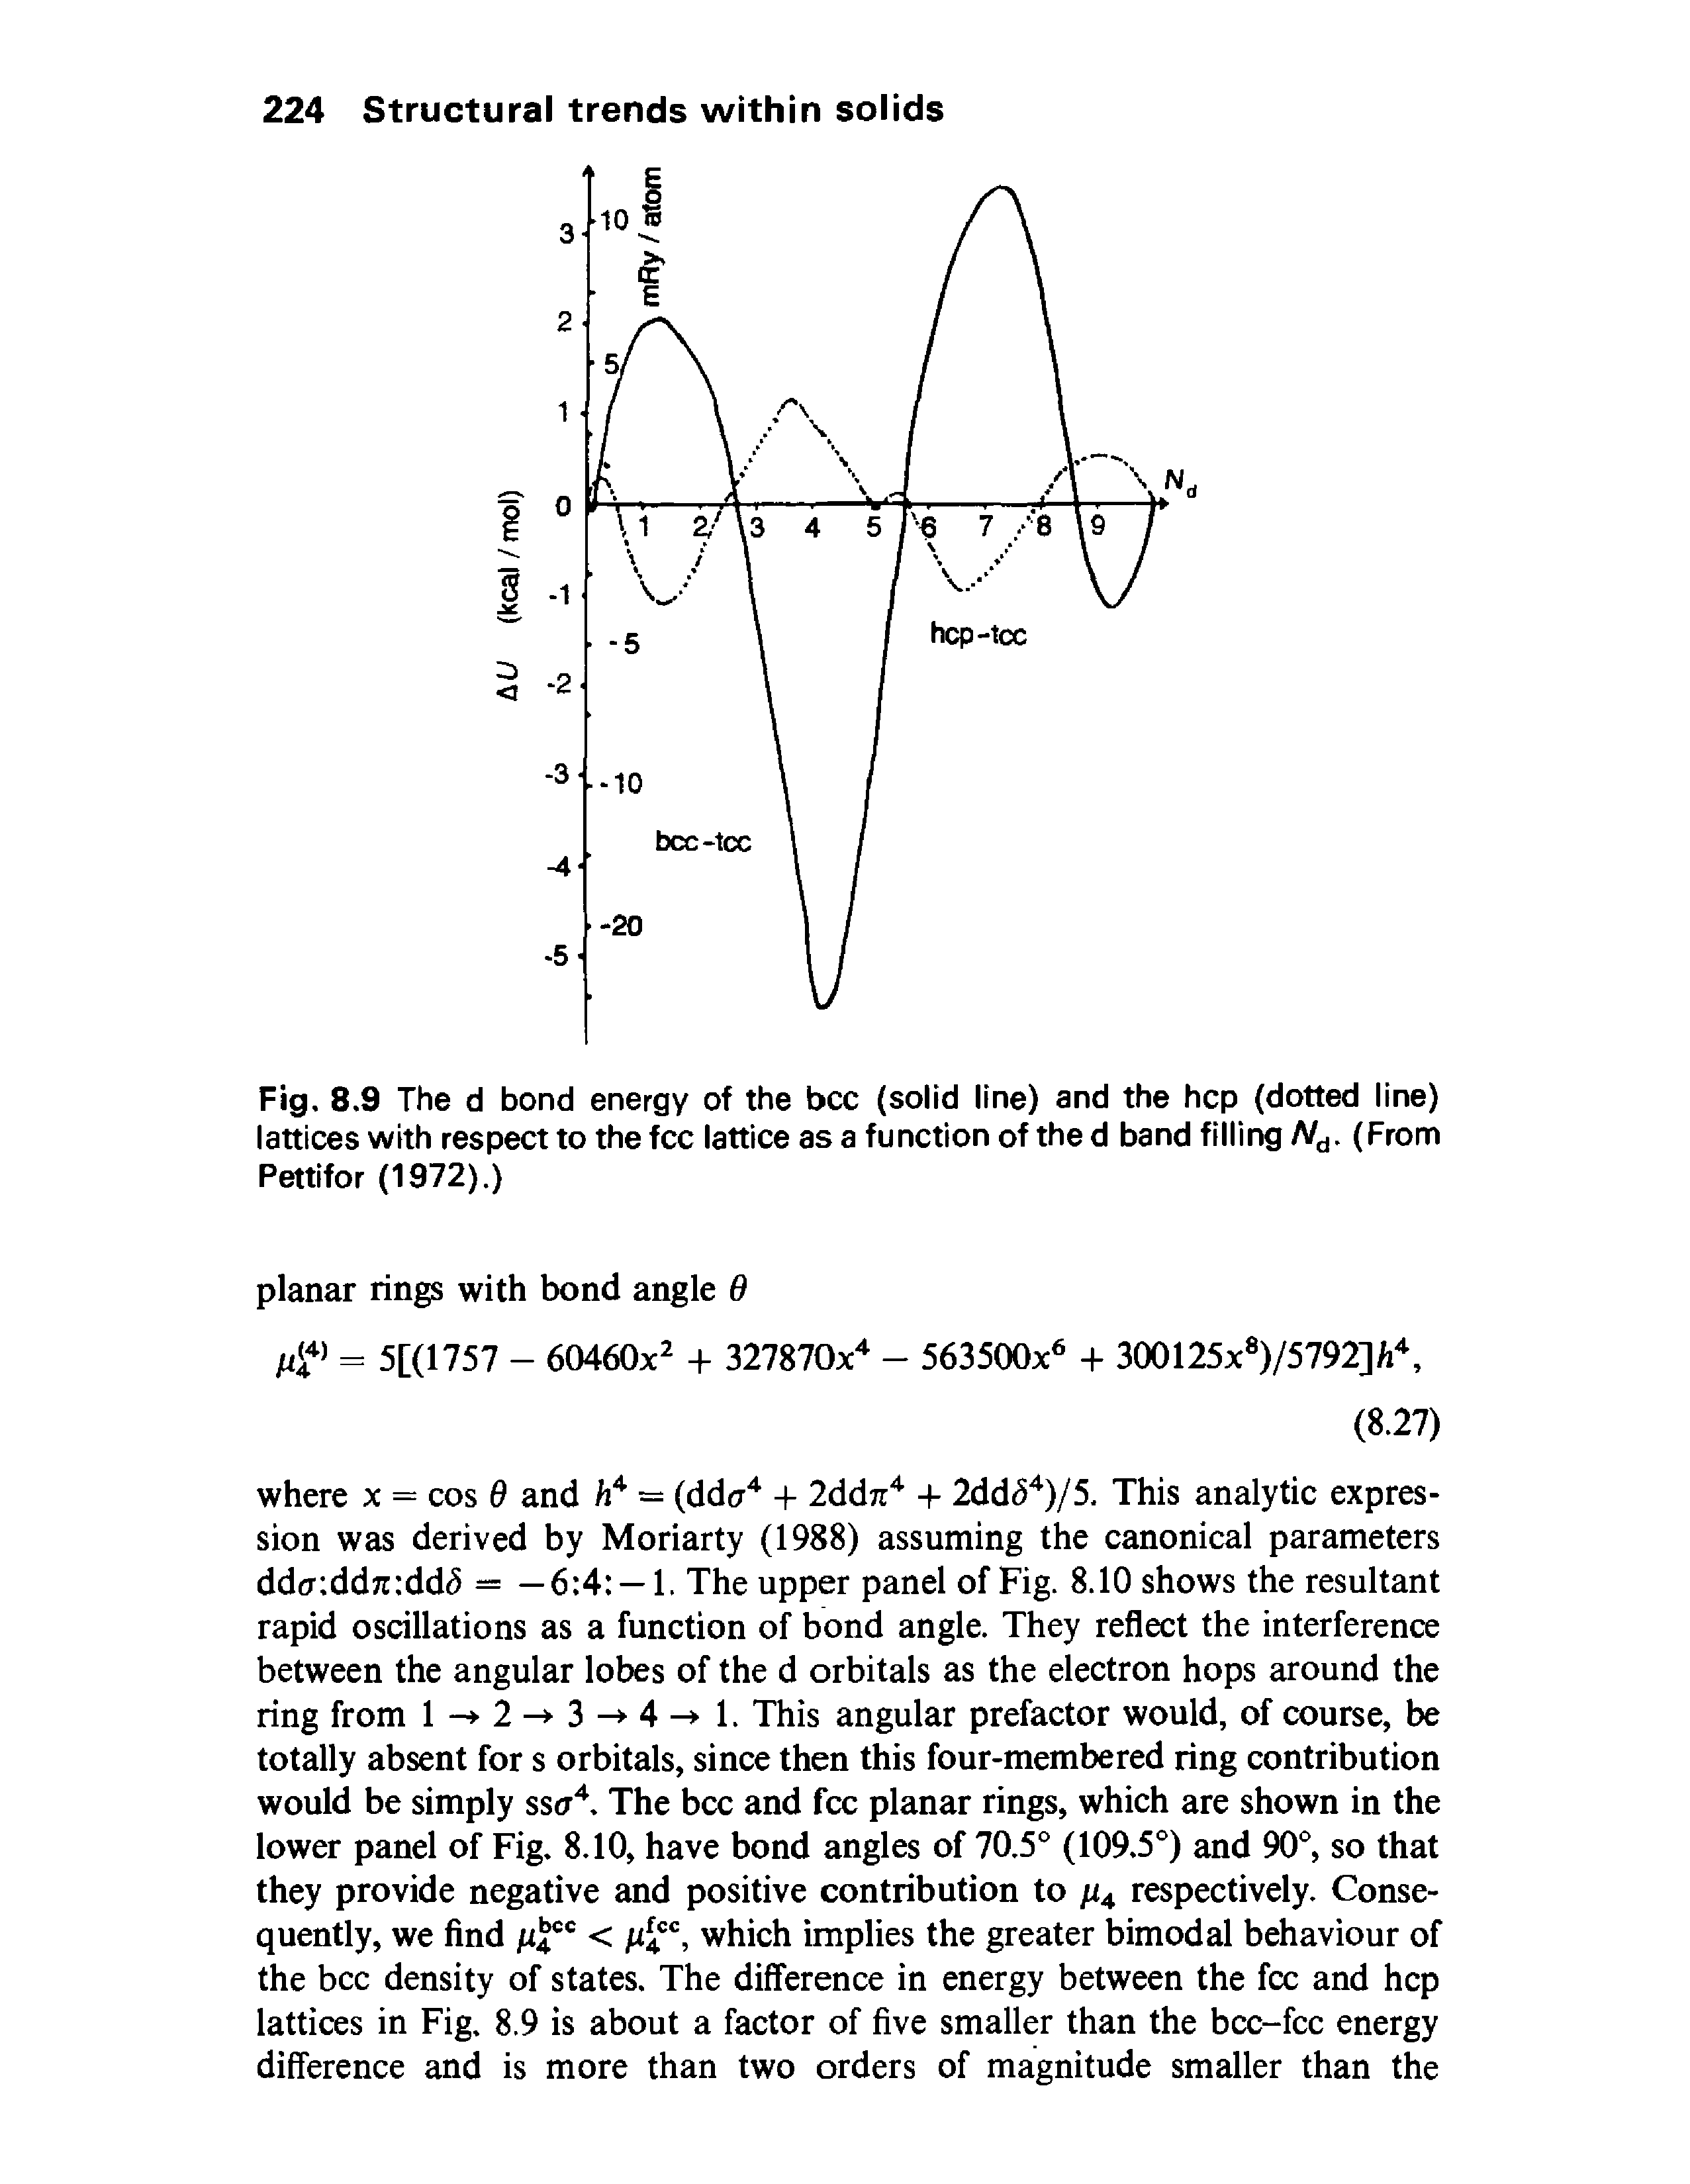 Fig. 8.9 The d bond energy of the bcc (solid line) and the hep (dotted line) lattices with respect to the fee lattice as a function of the d band filling Nd. (From Pettifor (1972).)...